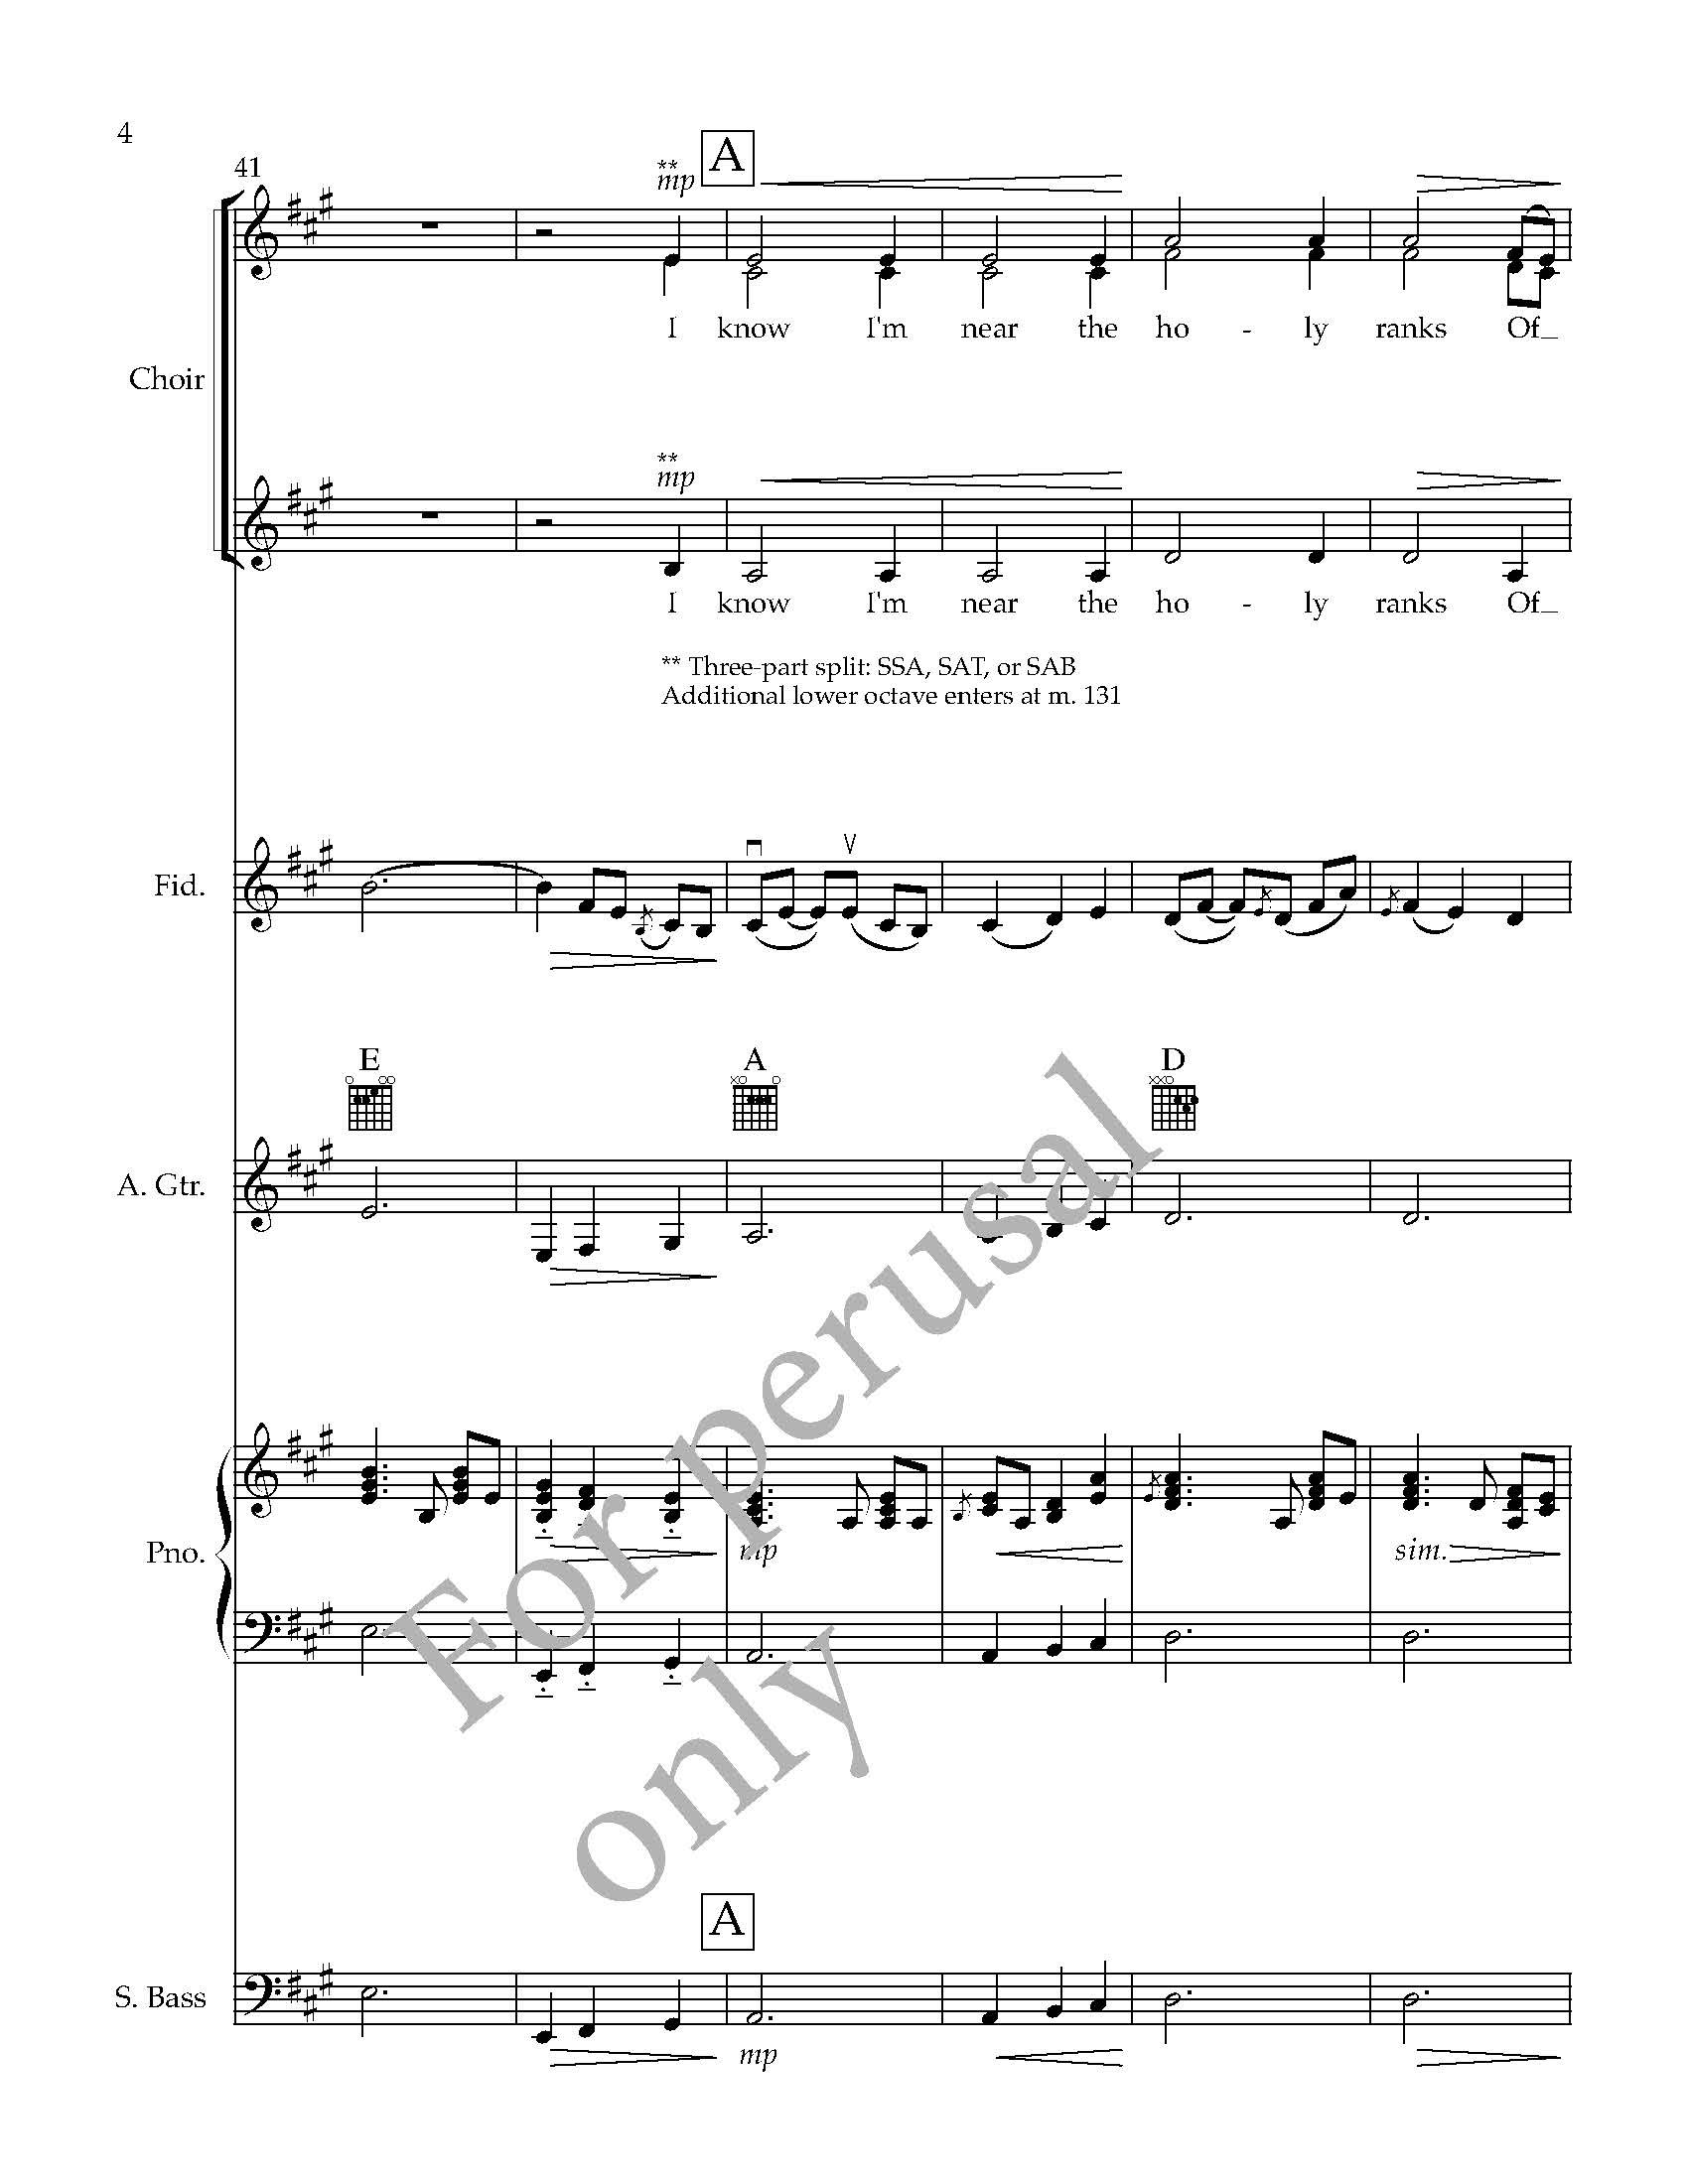 FULL SCORE preview - Angel Band for three-part choir, fiddle, piano, guitar, and bass - arr_Page_04.jpg